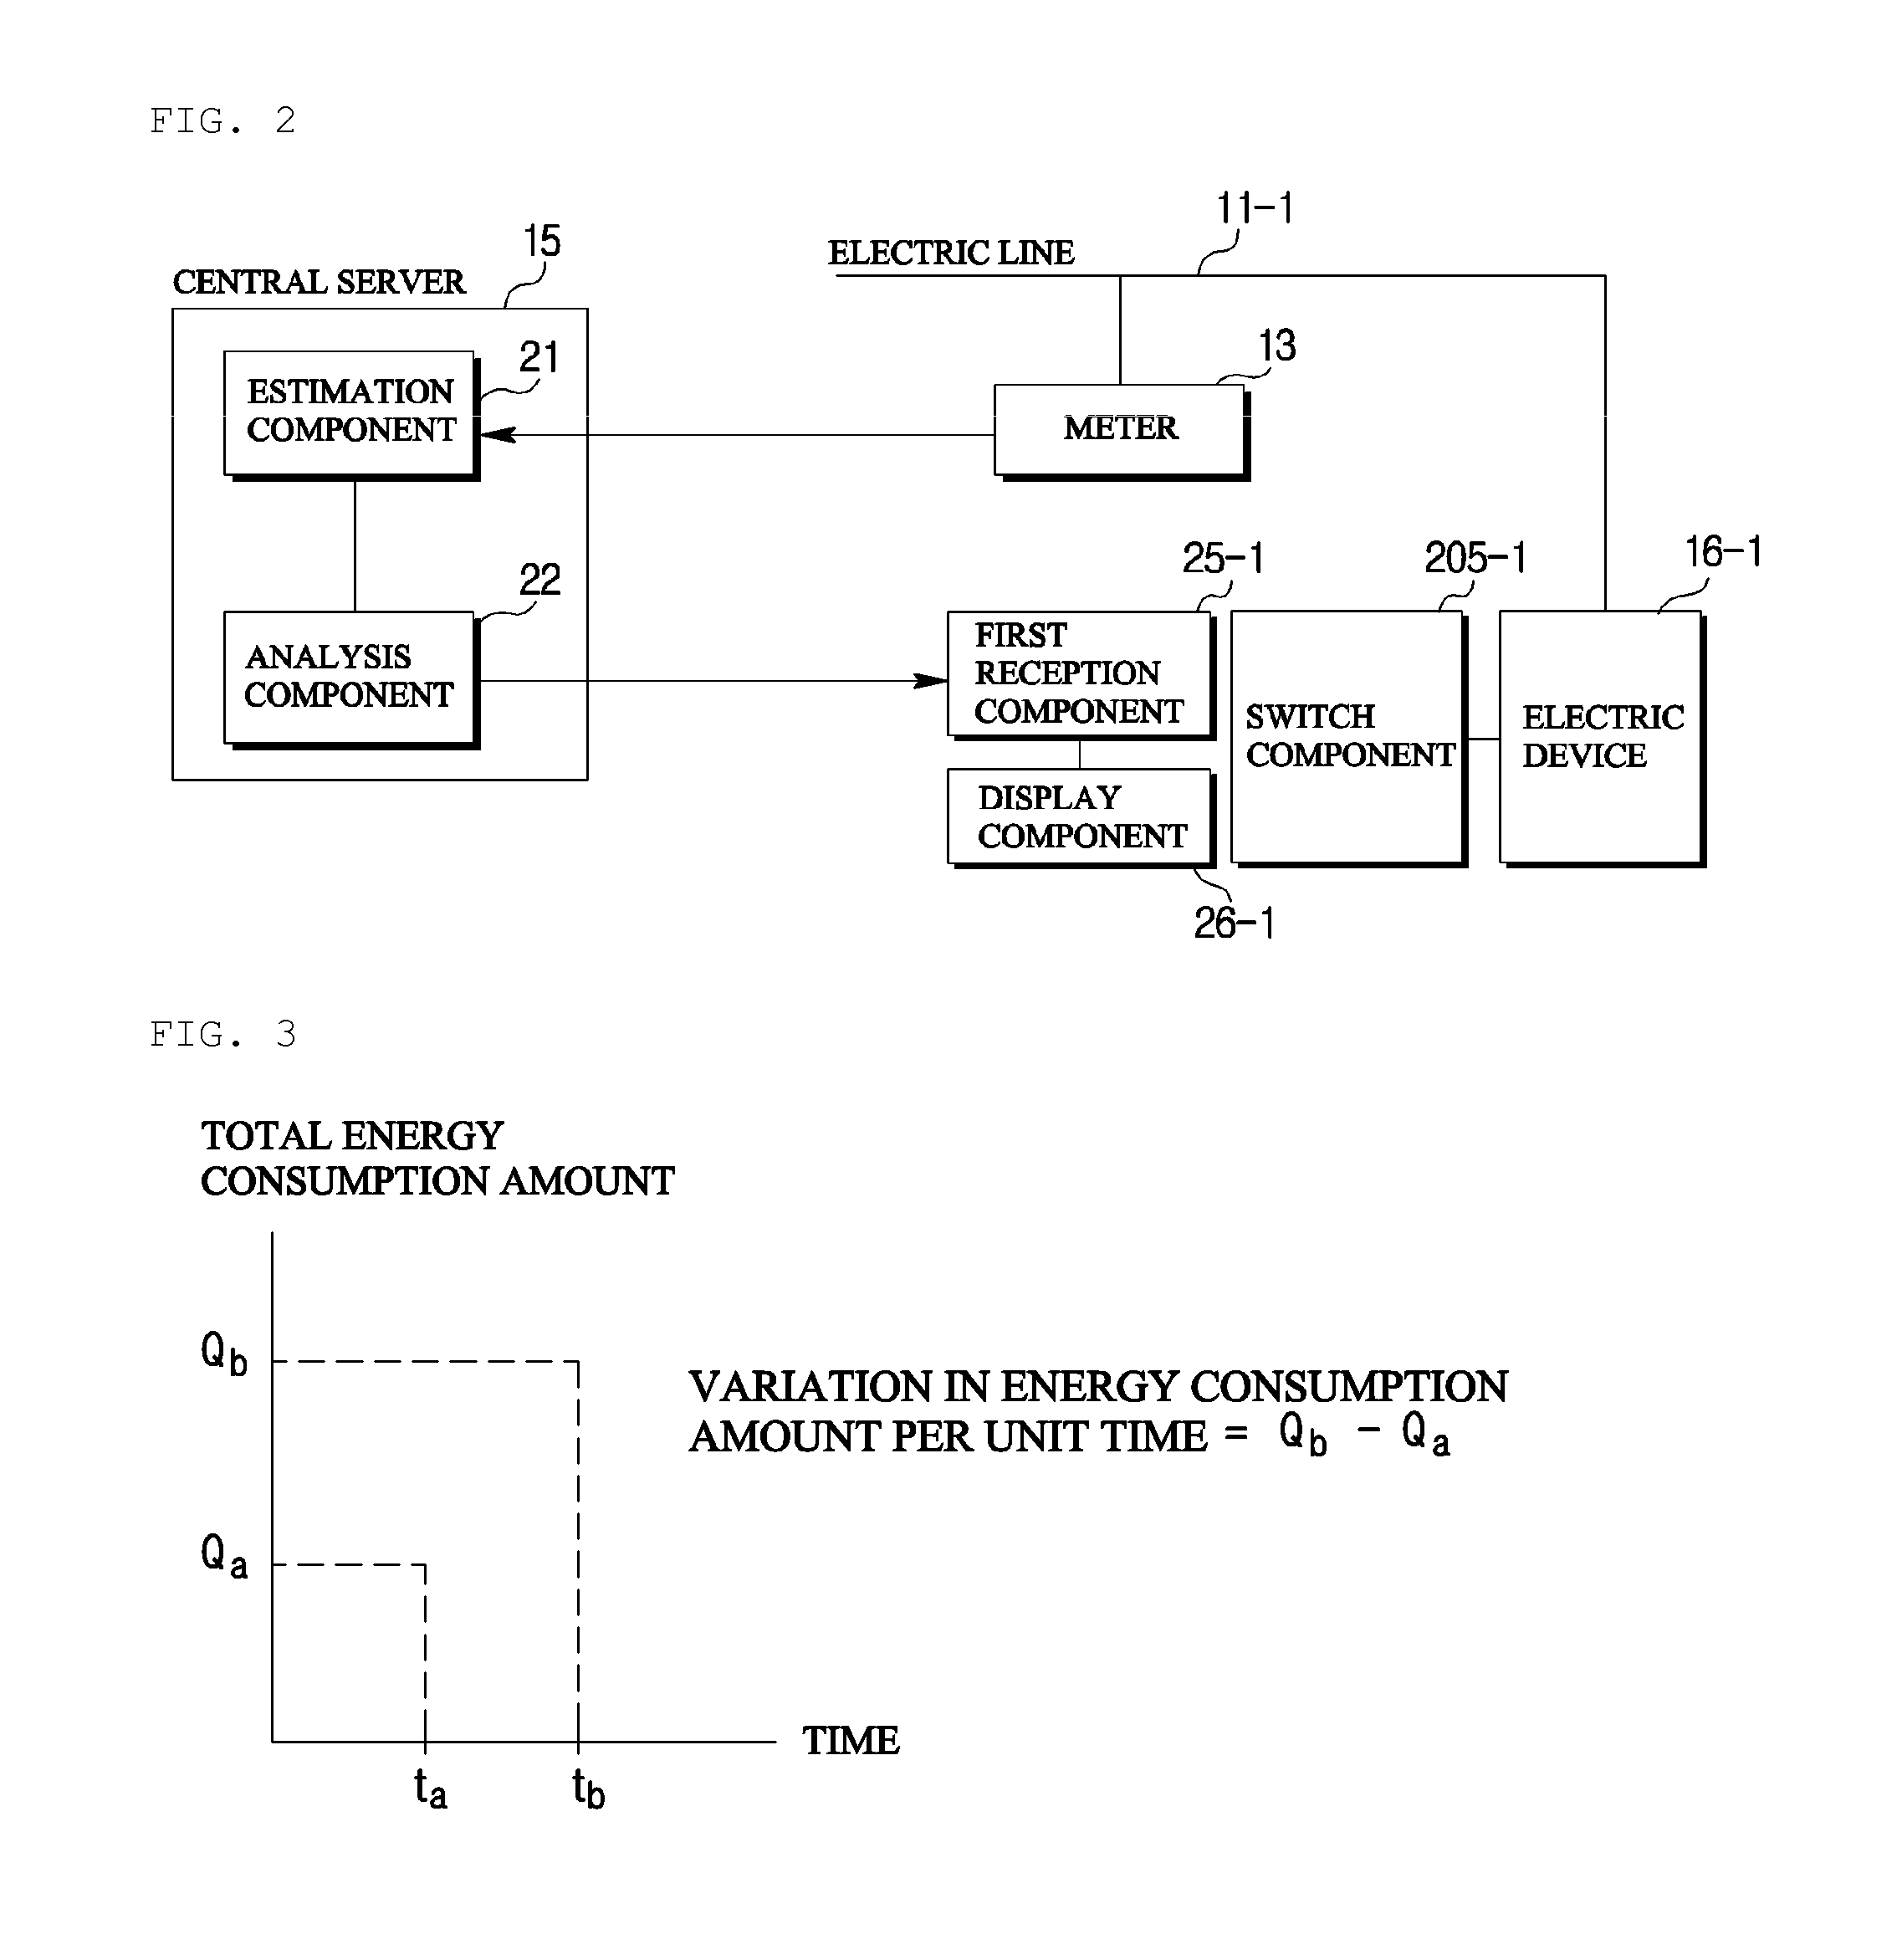 Apparatus and method for energy management of electric devices